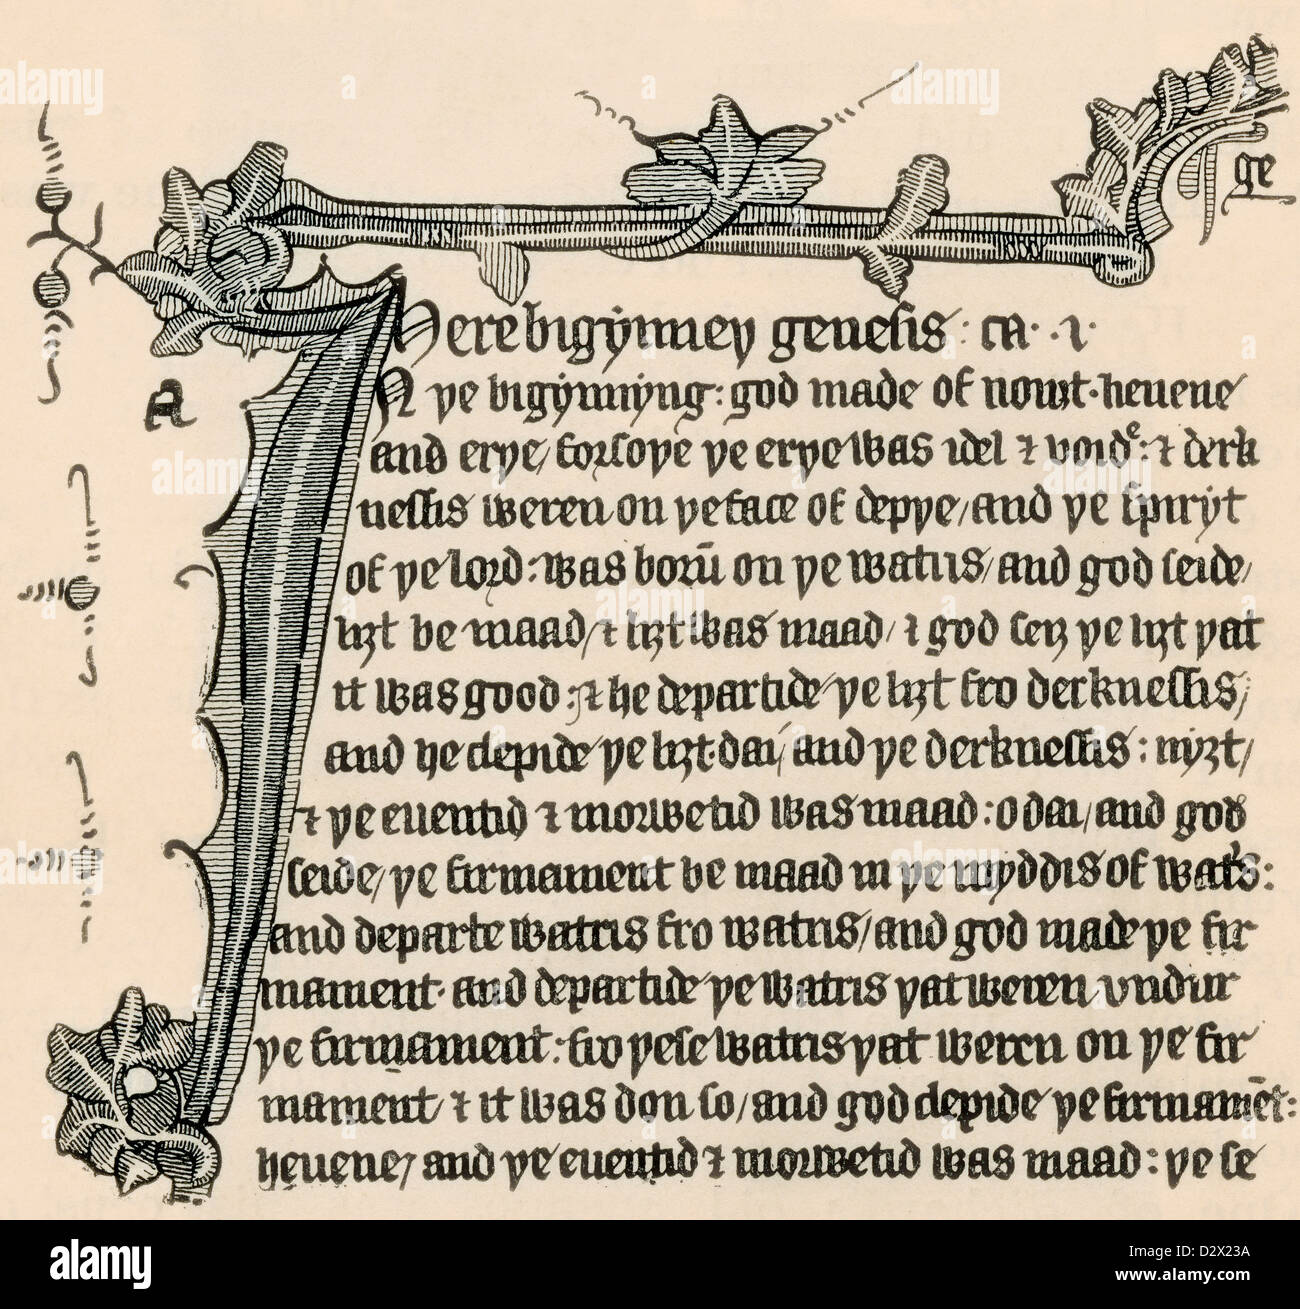 Portion of a page from the Manuscript of Wycliffe's Bible. John Wycliffe, also spelled Wyclif, Wycliff, Wiclef, Wicliffe, Wickliffe; 1320 – 1384. English scholastic philosopher, theologian, Biblical translator, reformer, and seminary professor at Oxford.  From A First Book of British History published 1925. Stock Photo